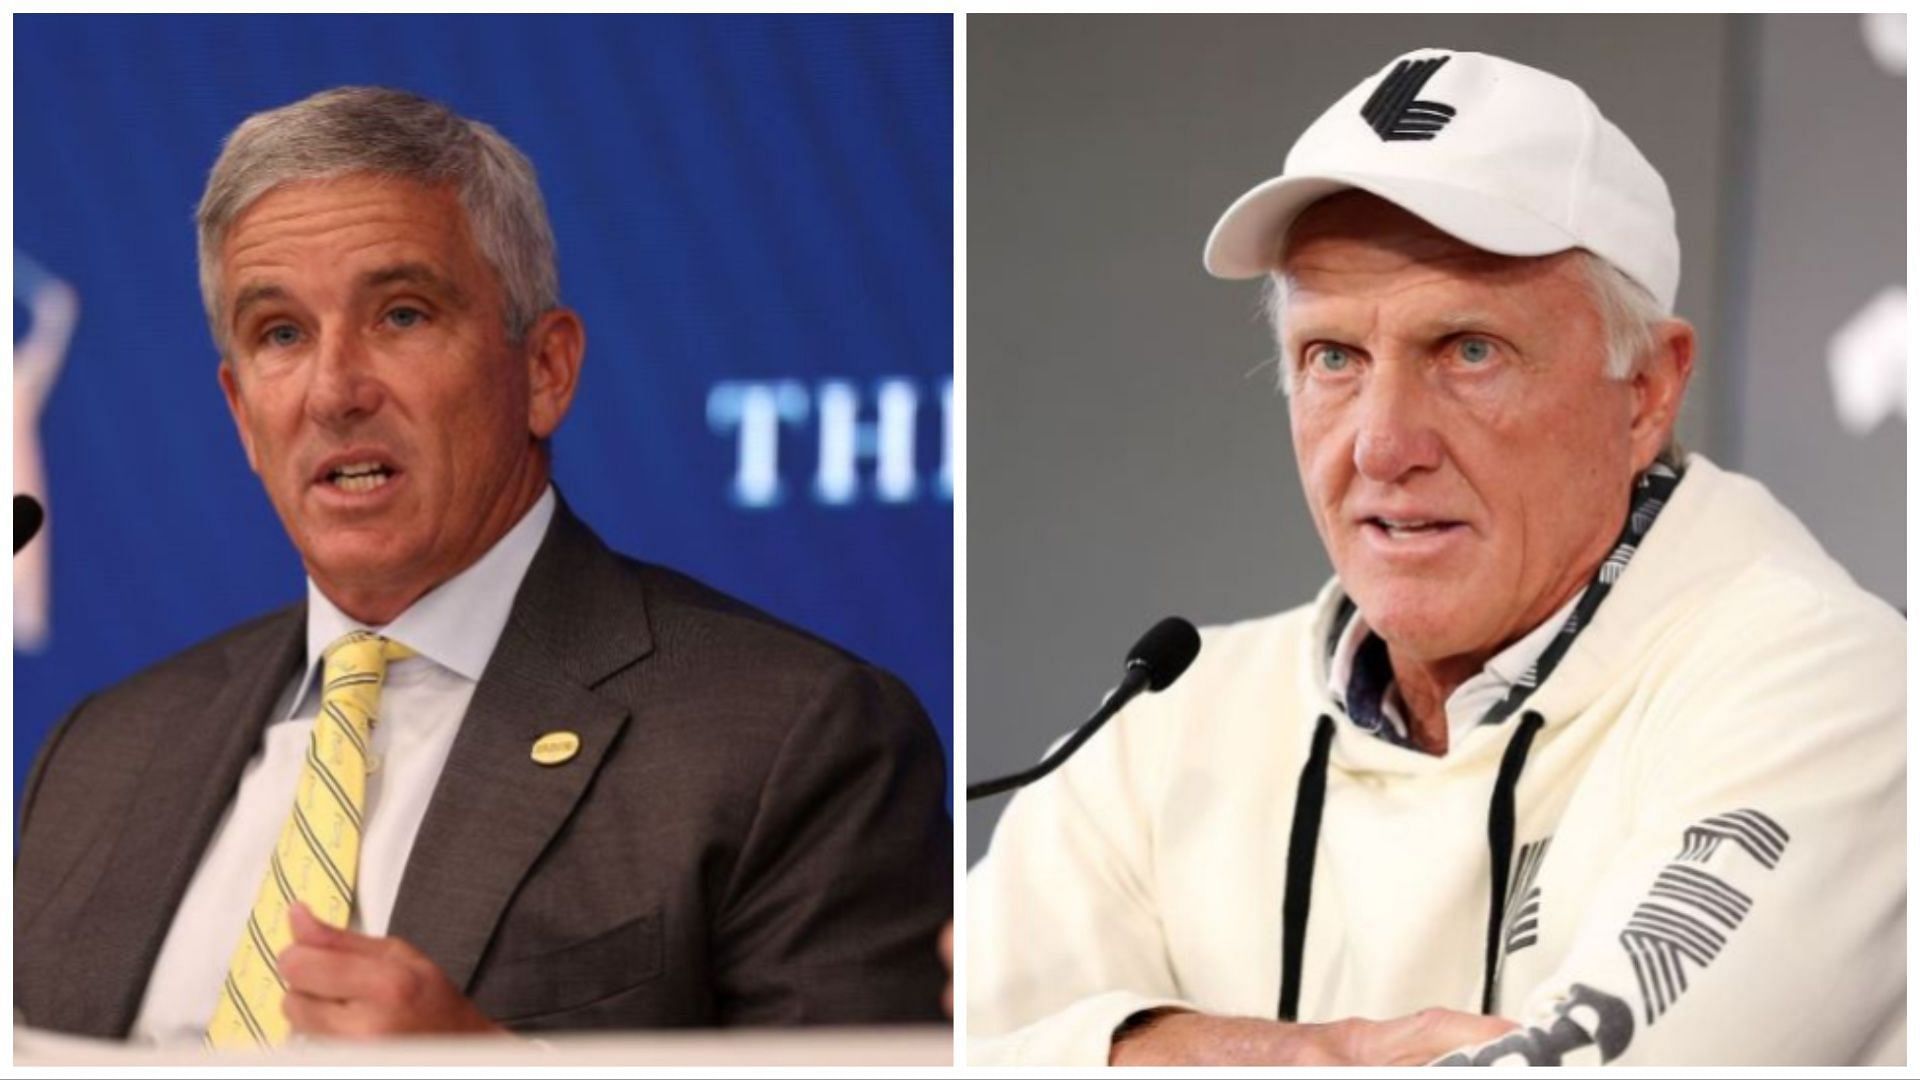 PGA Tour commissioner Jay Monahan and LIV golf CEO Greg Norman (via Getty Images)